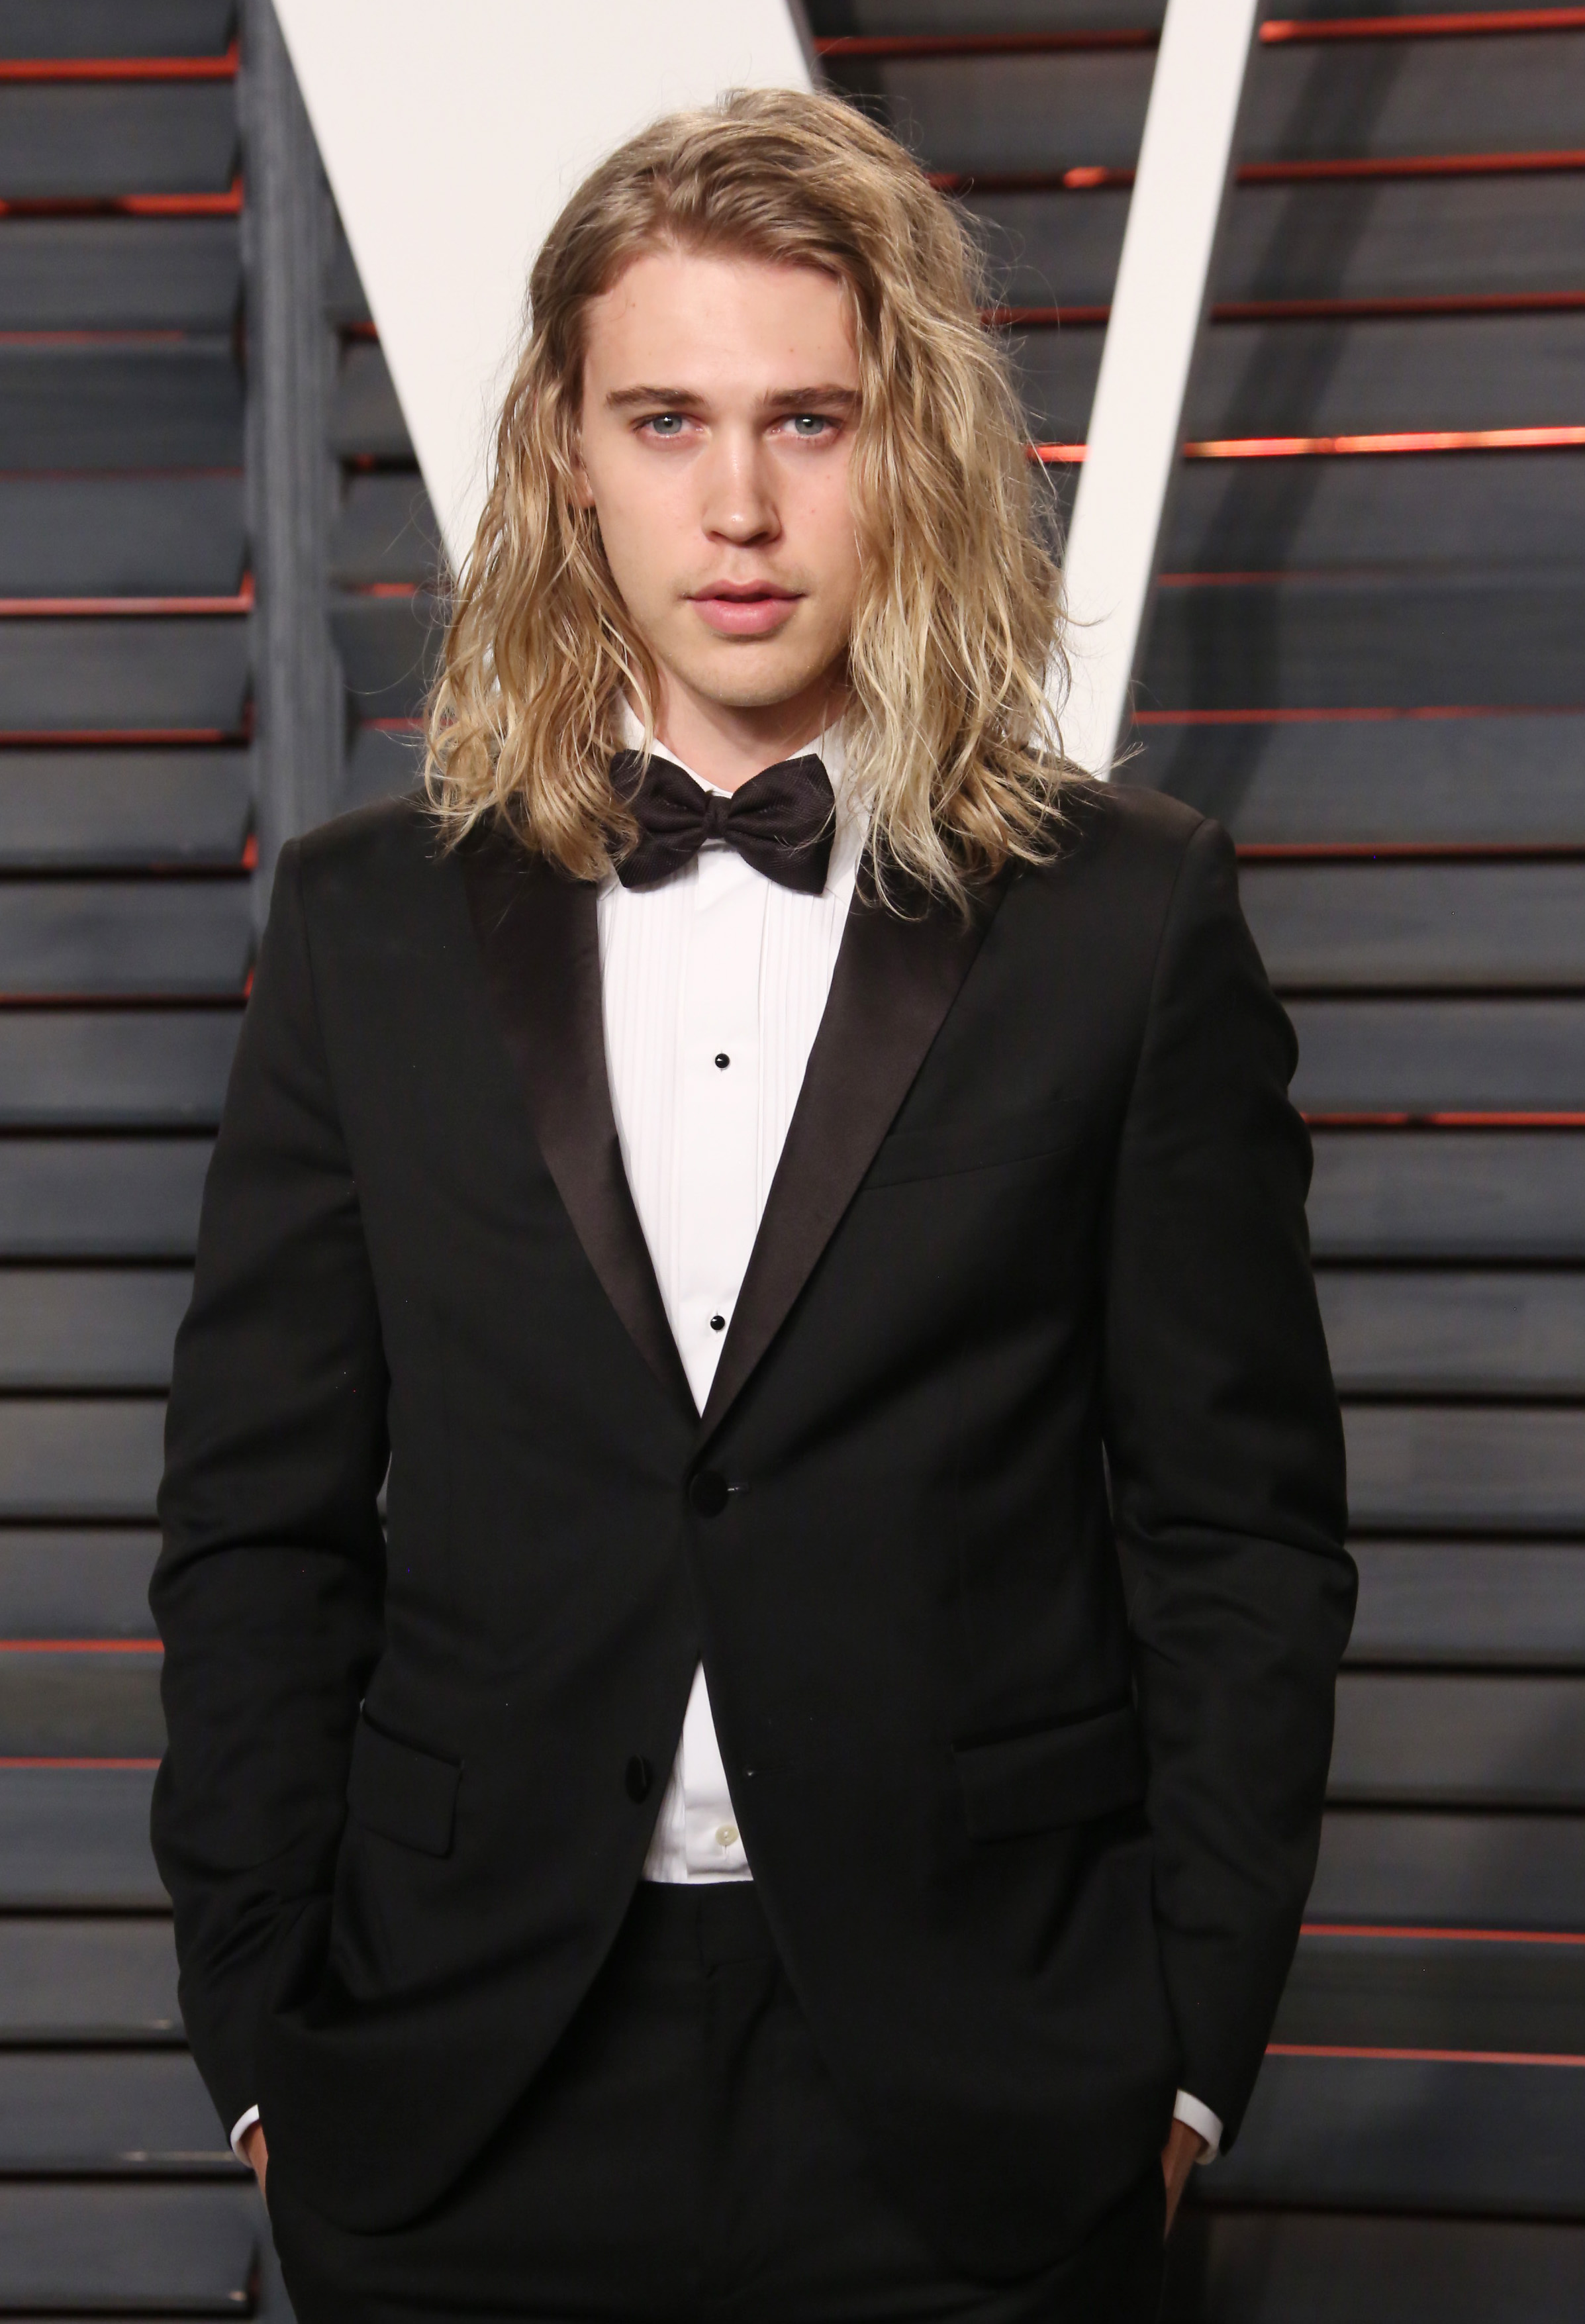 Did Austin Butler Ever Get Plastic Surgery? Quotes, Photos